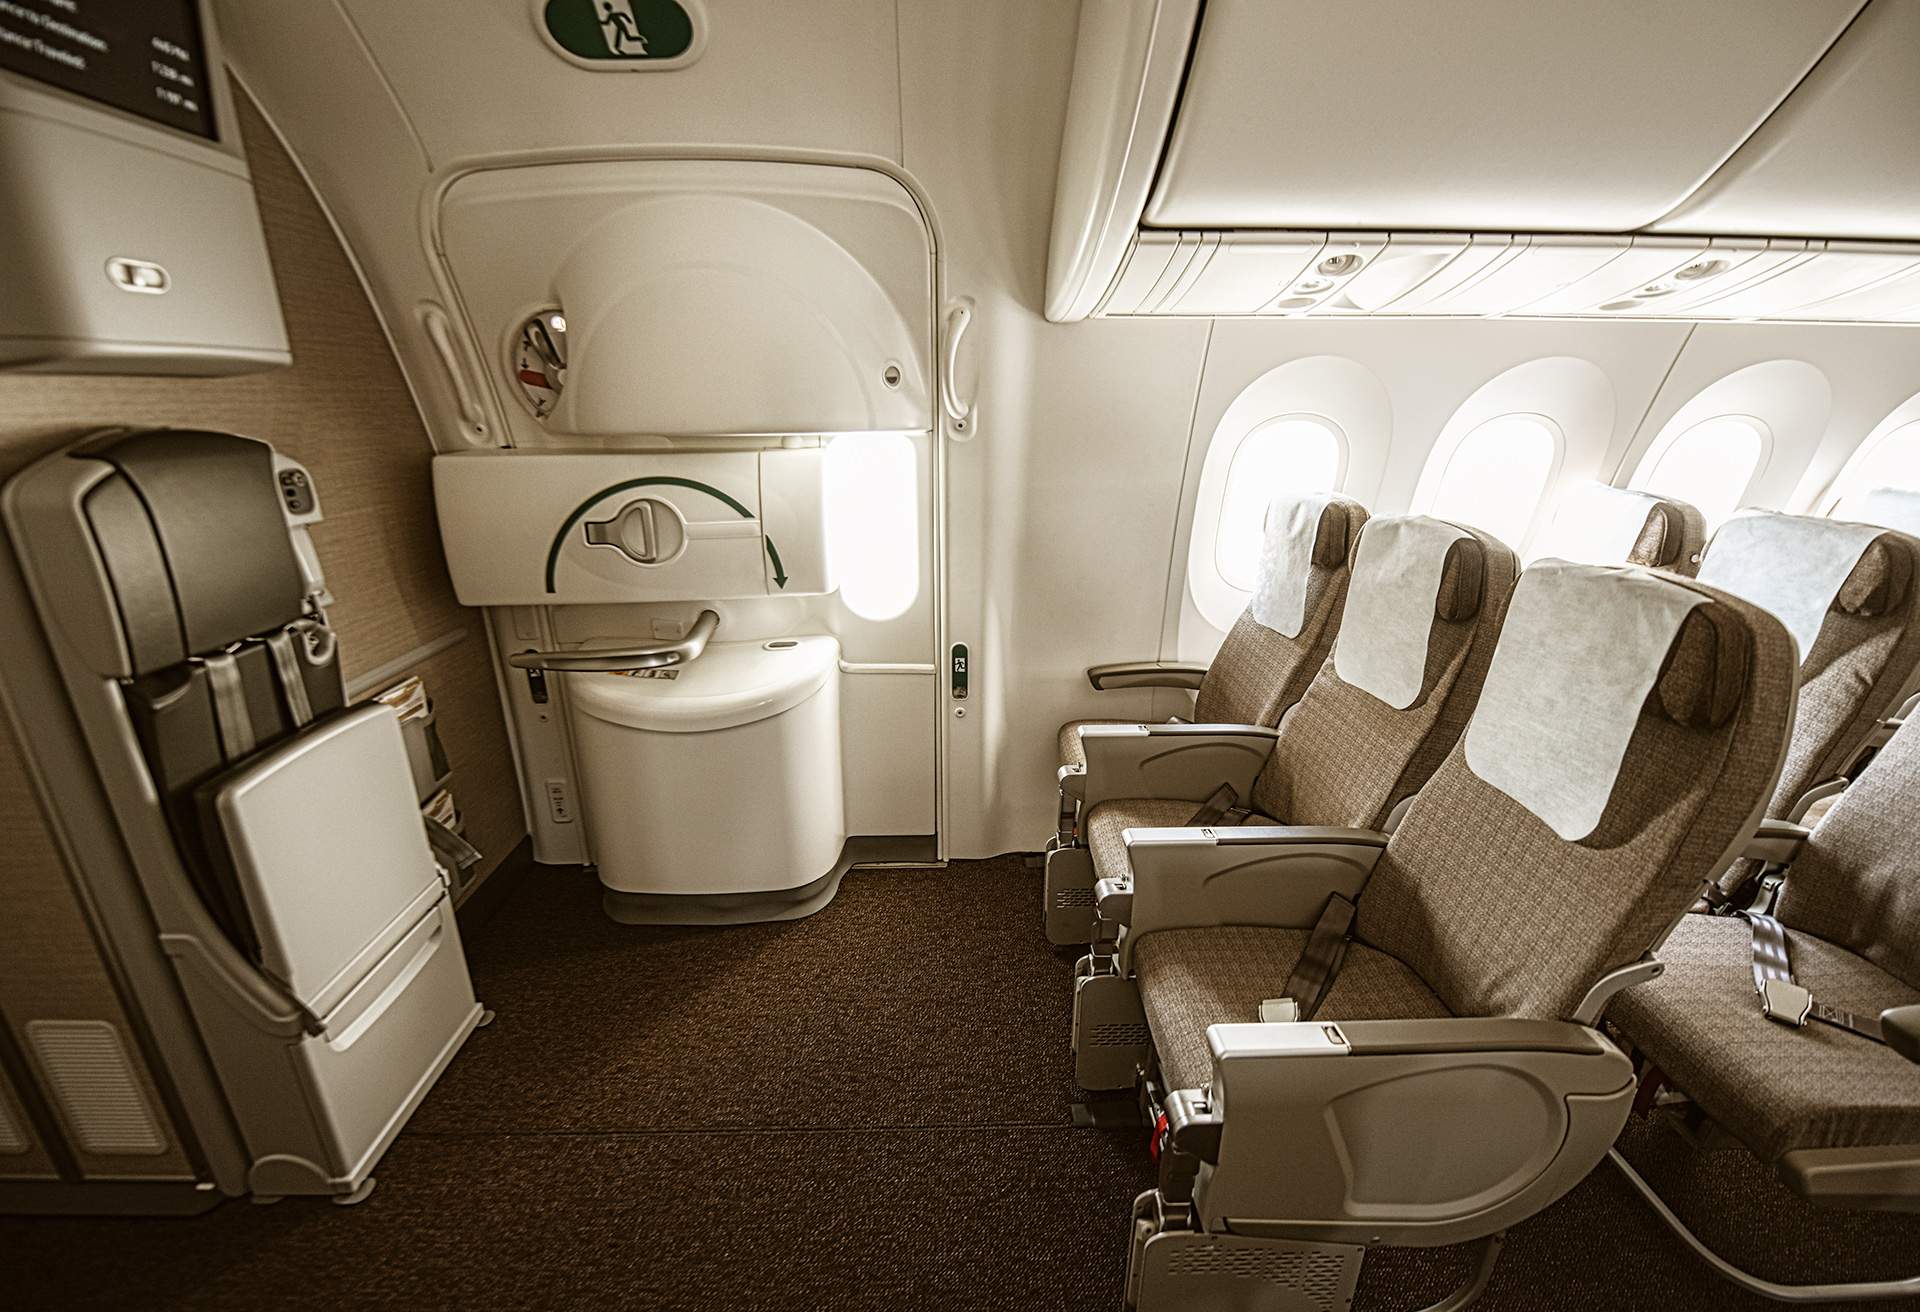 Why this is the most popular seat on an airplane